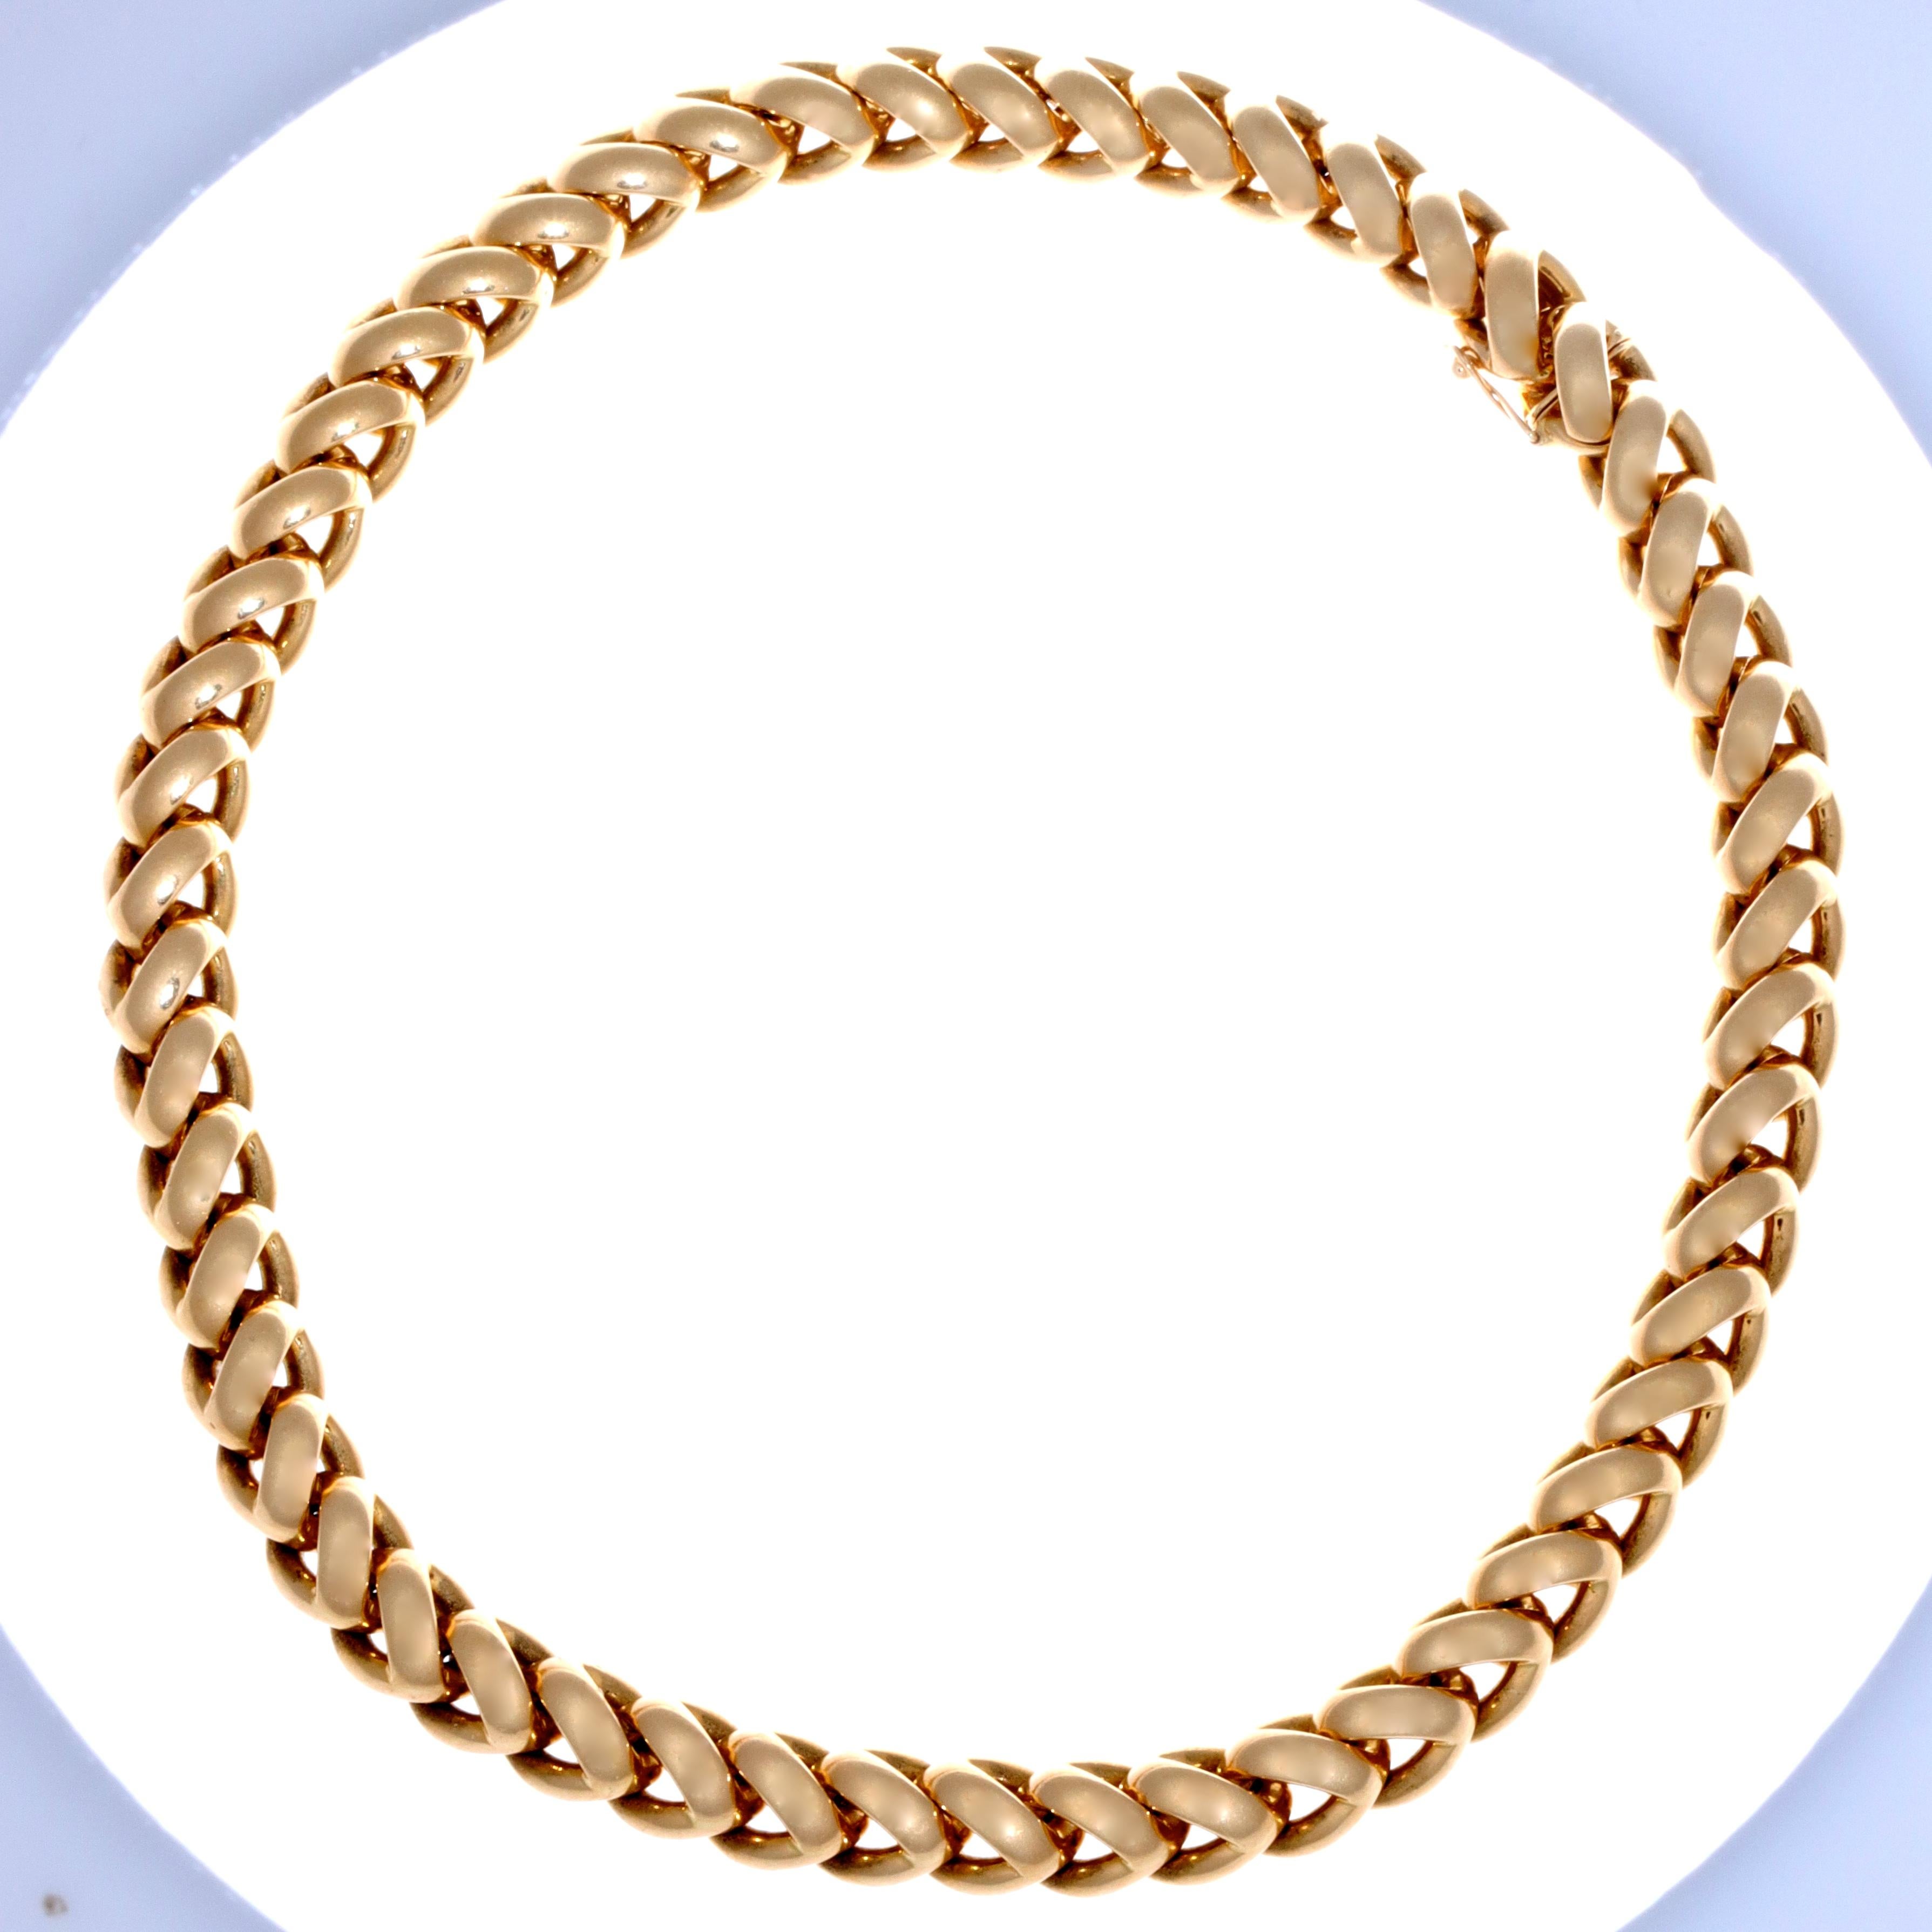 Gold, bold and signed. All a gold chain needs to be. You feel so luxurious wearing this necklace, mainly because it's 190 grams of solid 18K gold. This is a breathtaking Hermes 18K Yellow Gold Necklace. Made of twisted mariner's link chains.